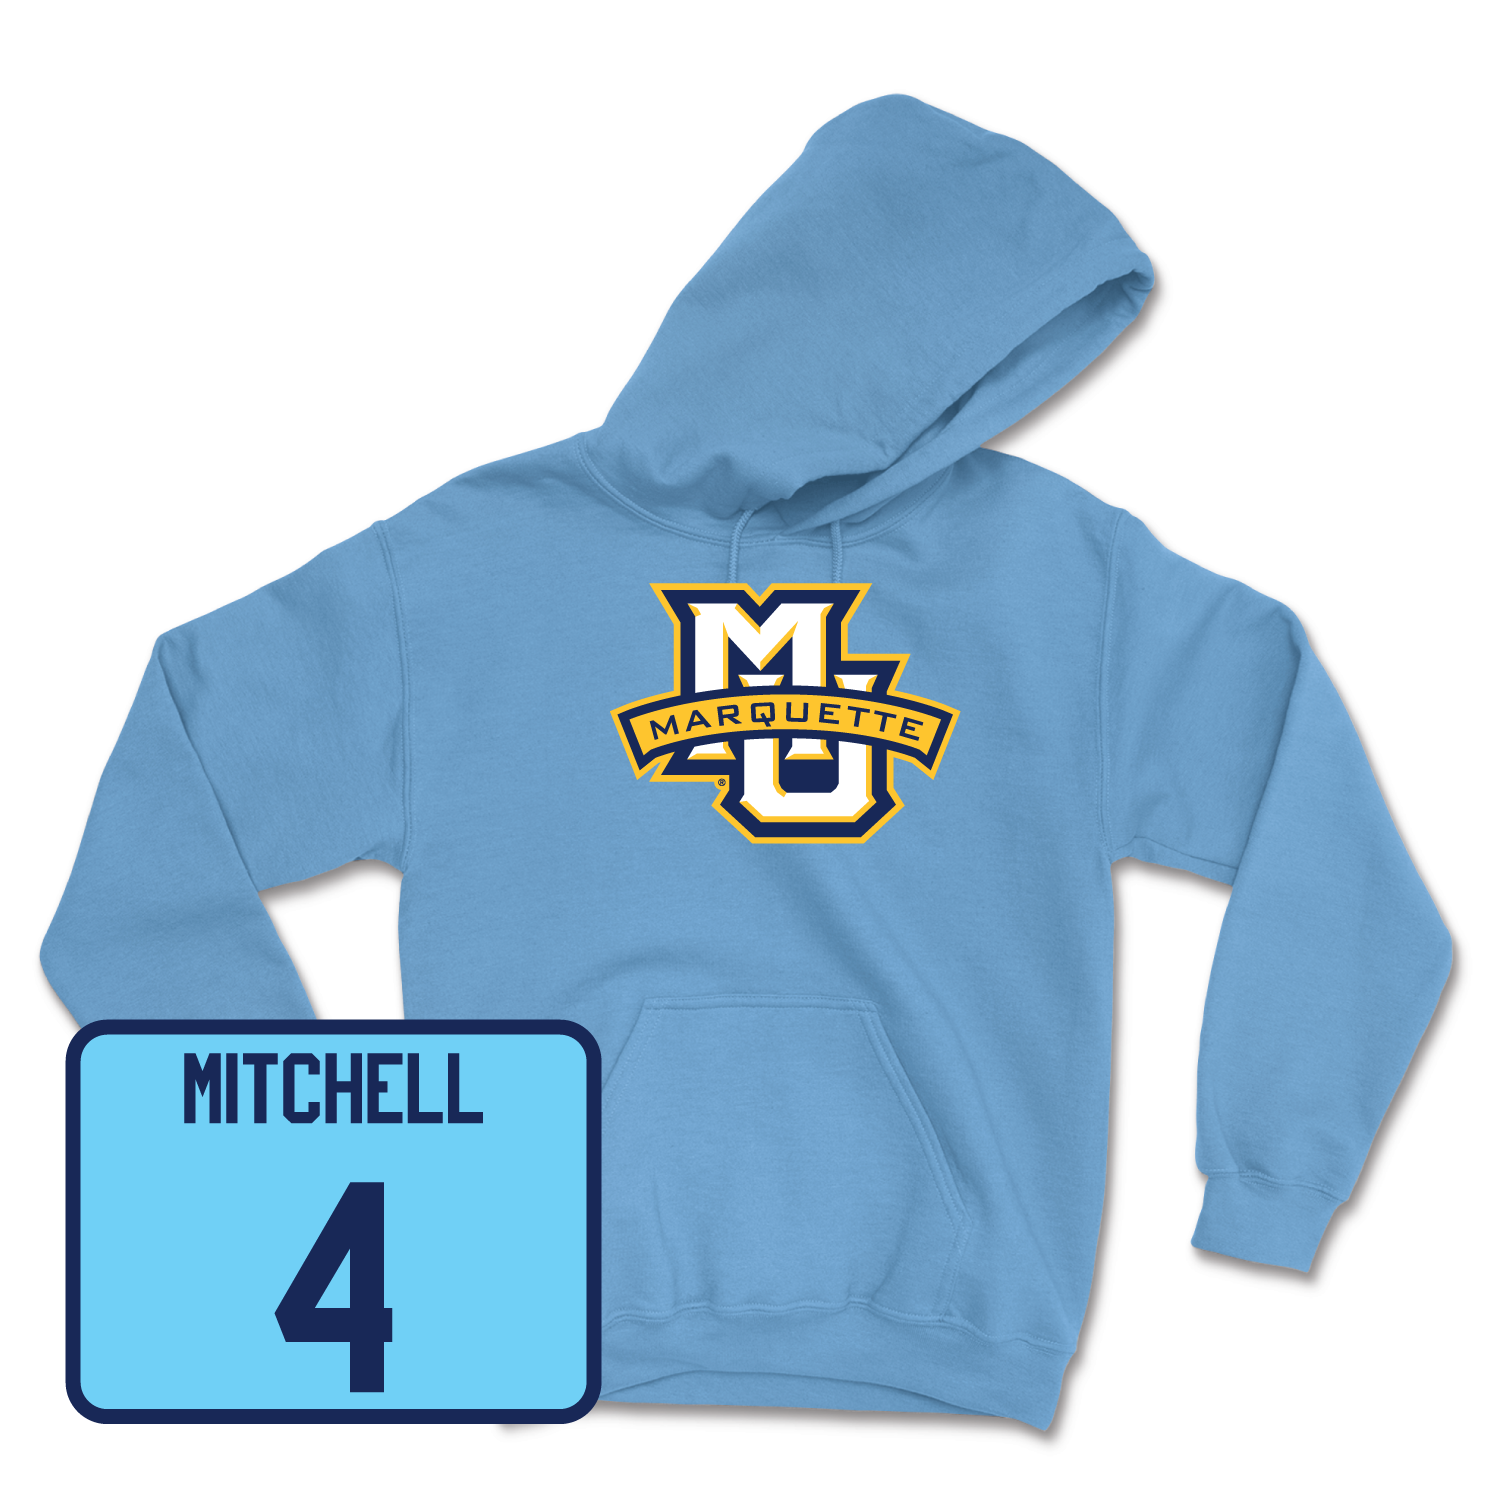 Championship Blue Men's Basketball Marquette Hoodie 2 Large / Stevie Mitchell | #4